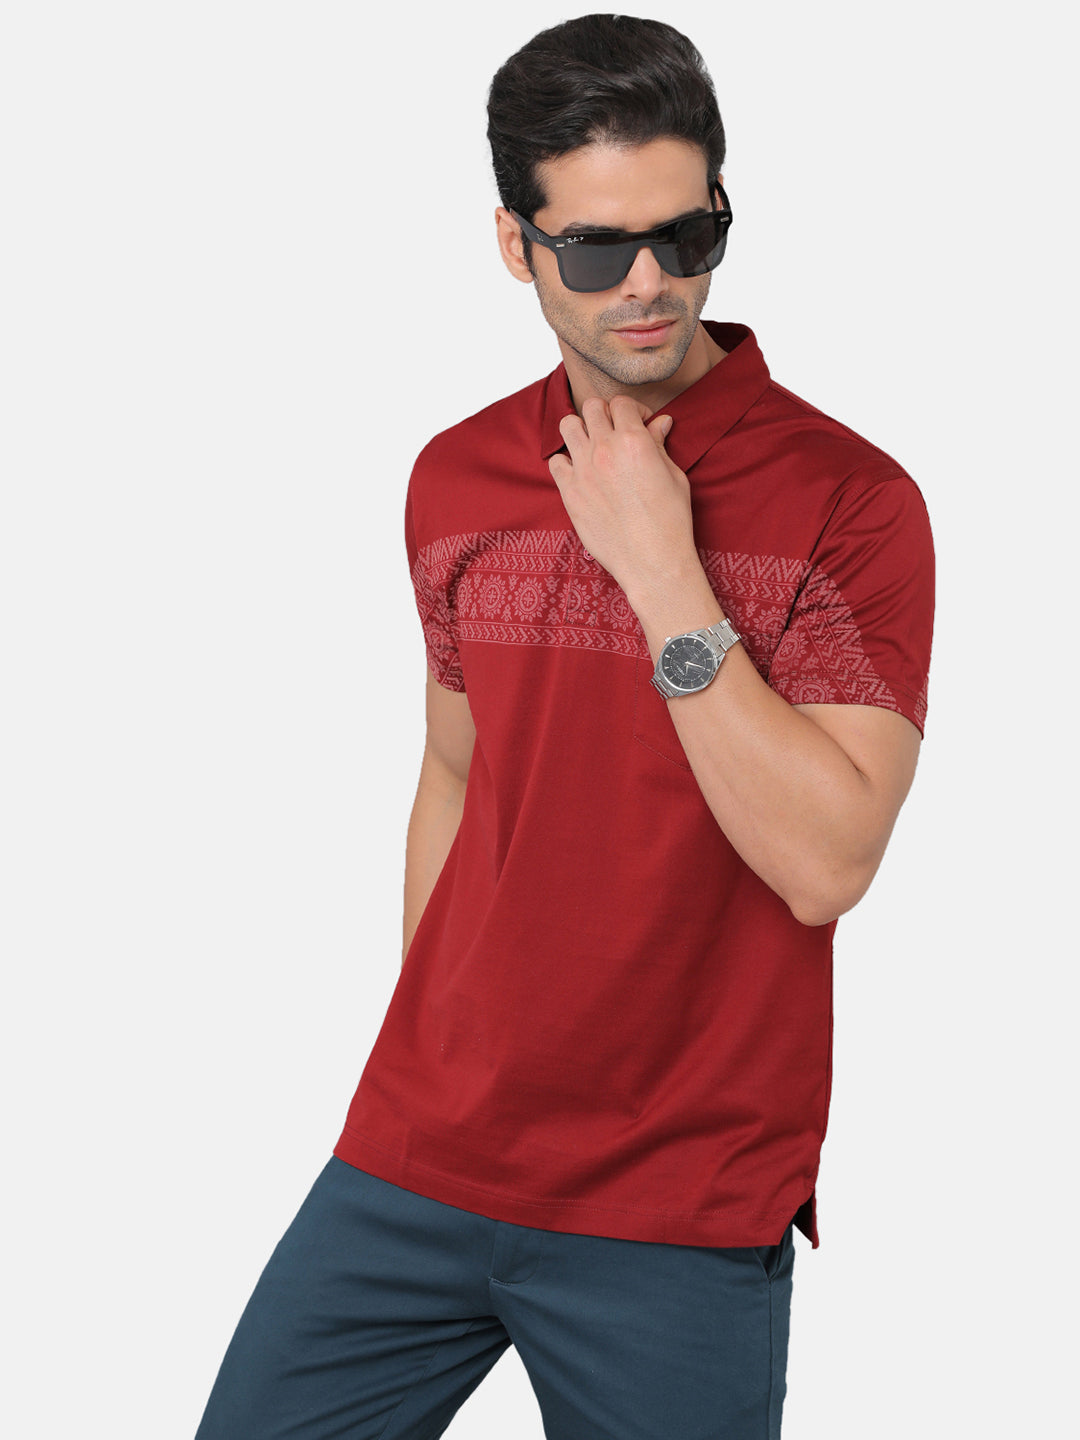 Classic Polo Mens Cotton Printed Slim Fit Polo Neck Red Color T-Shirt | Unico 17a